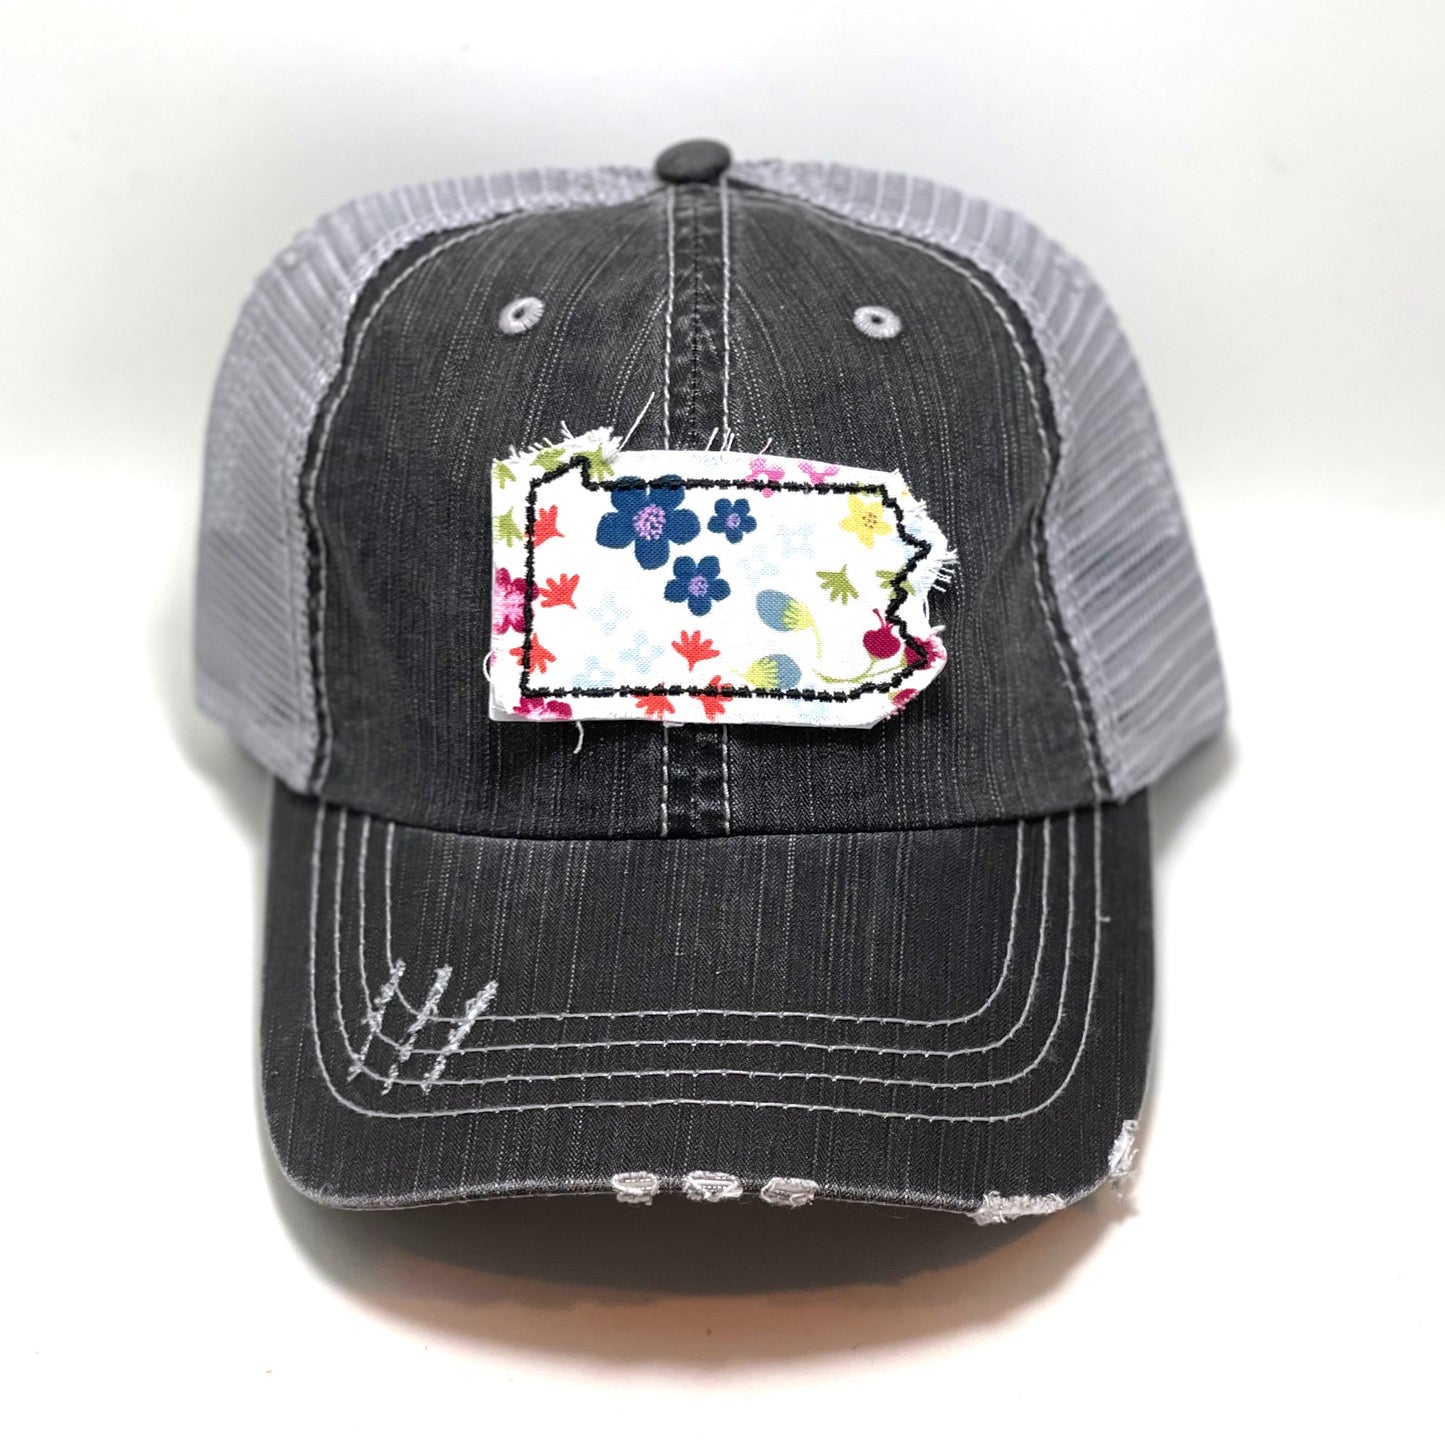 gray distressed trucker hat with gray floral fabric state of Pennsylvania